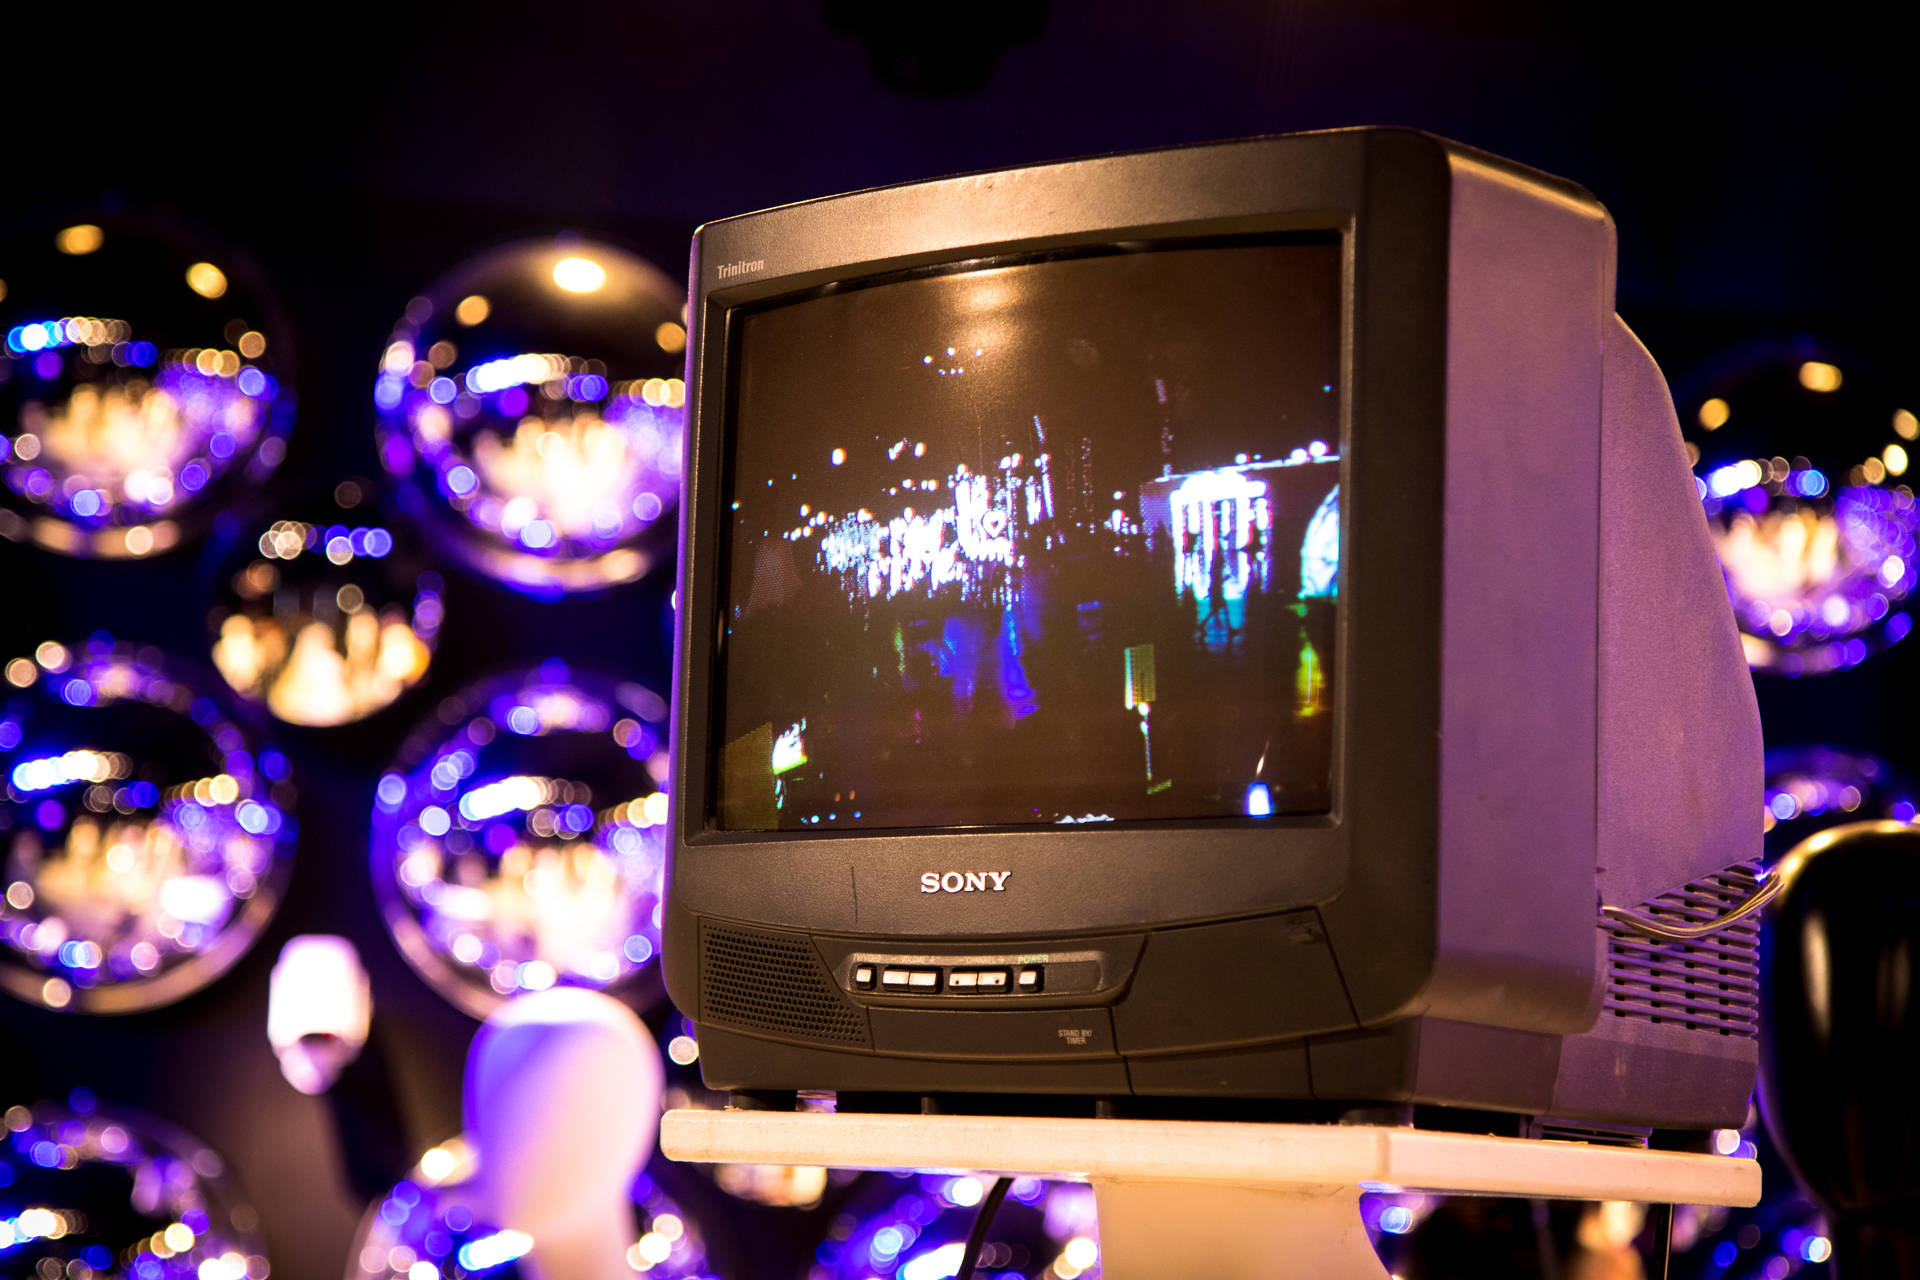 Sony Crt Television Wallpaper